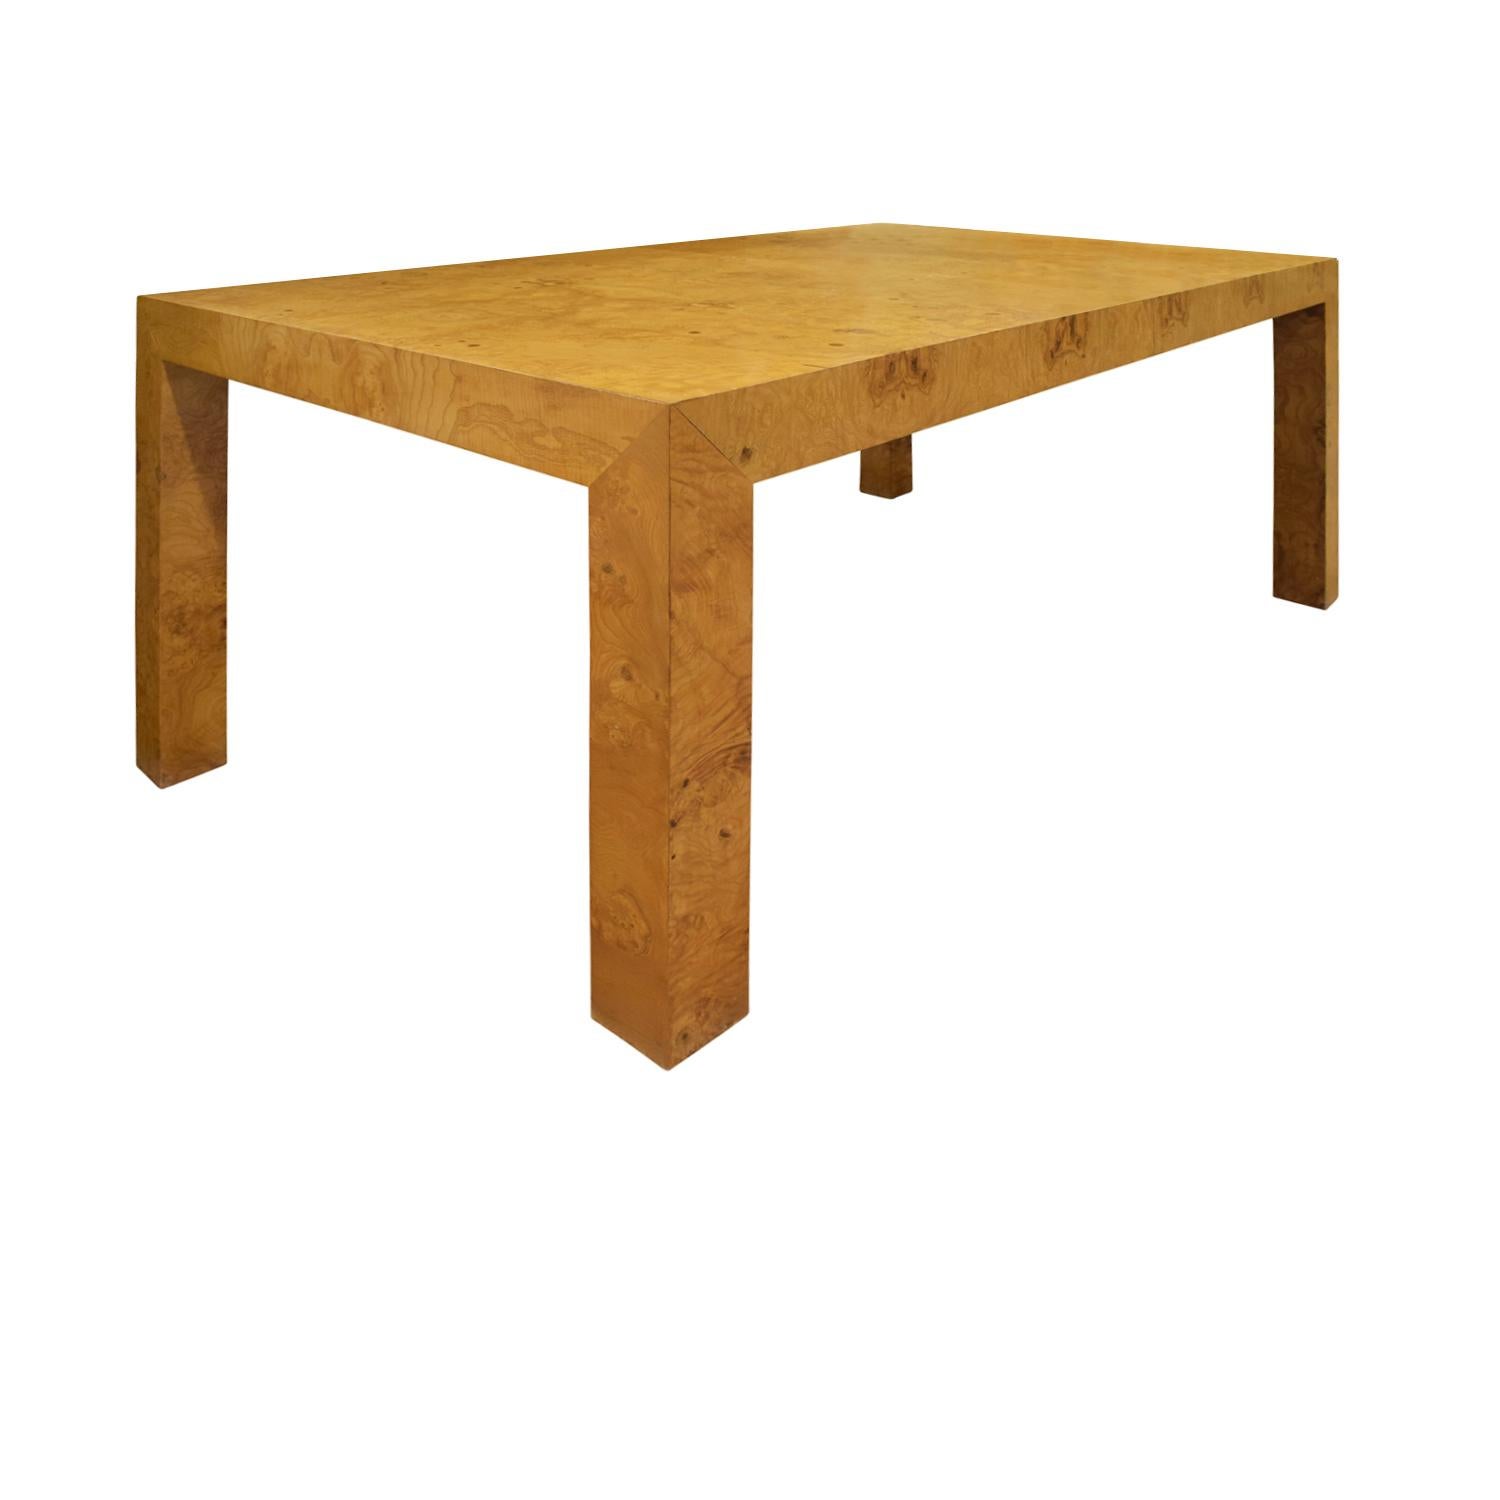 Mid-Century Modern Milo Baughman Extension Dining Table in Olive Burl, 1960s